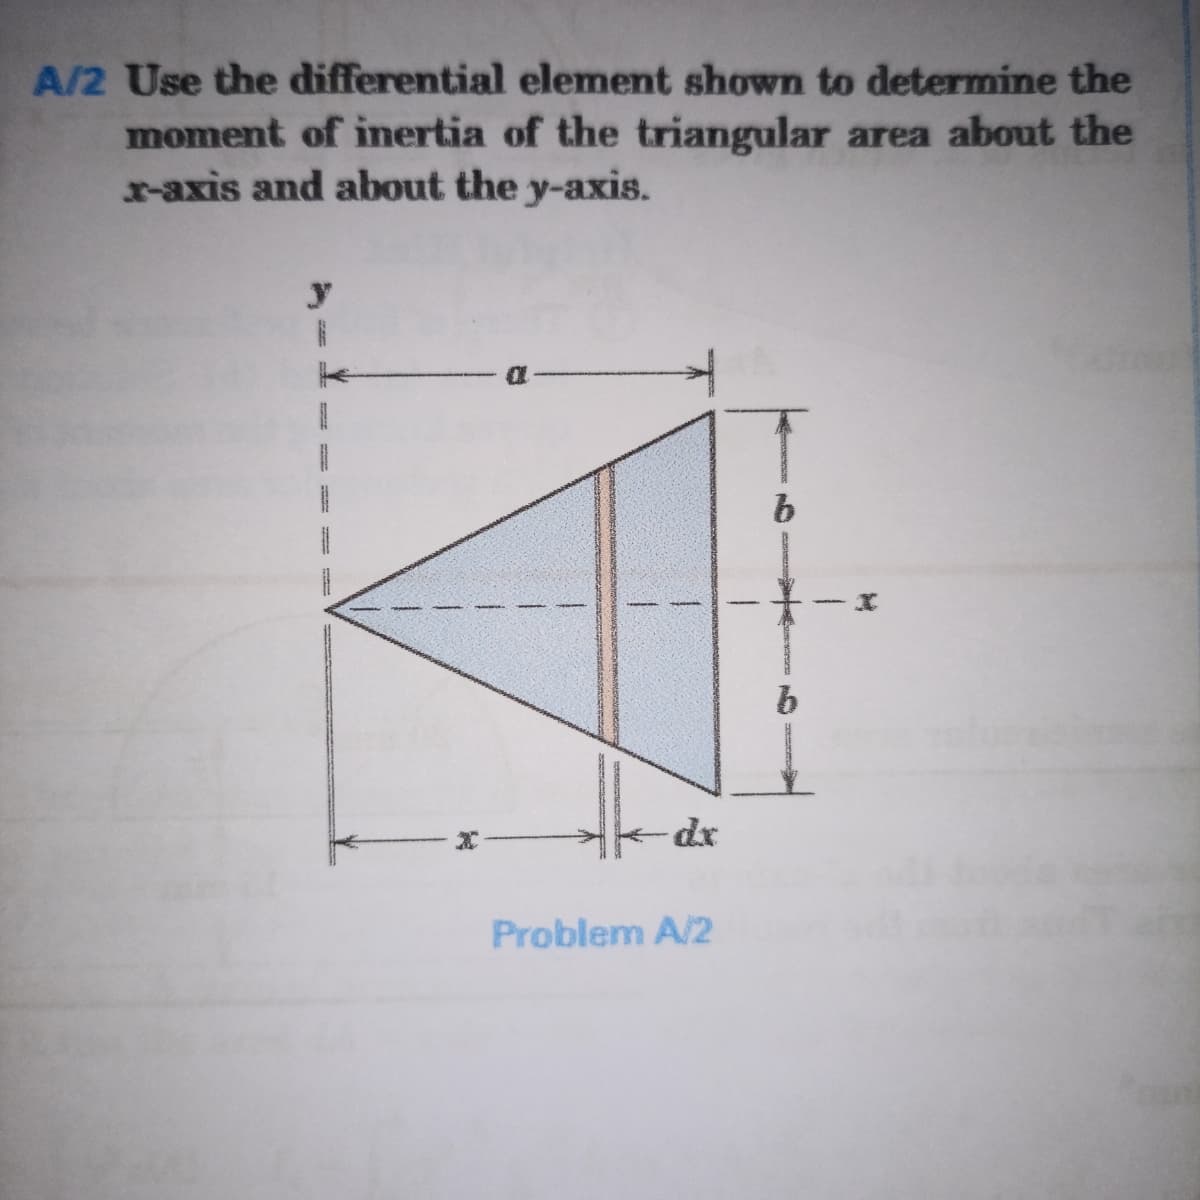 A/2 Use the differential element shown to determine the
moment of inertia of the triangular area about the
r-axis and about the y-axis.
b.
dp-
Problem A/2
